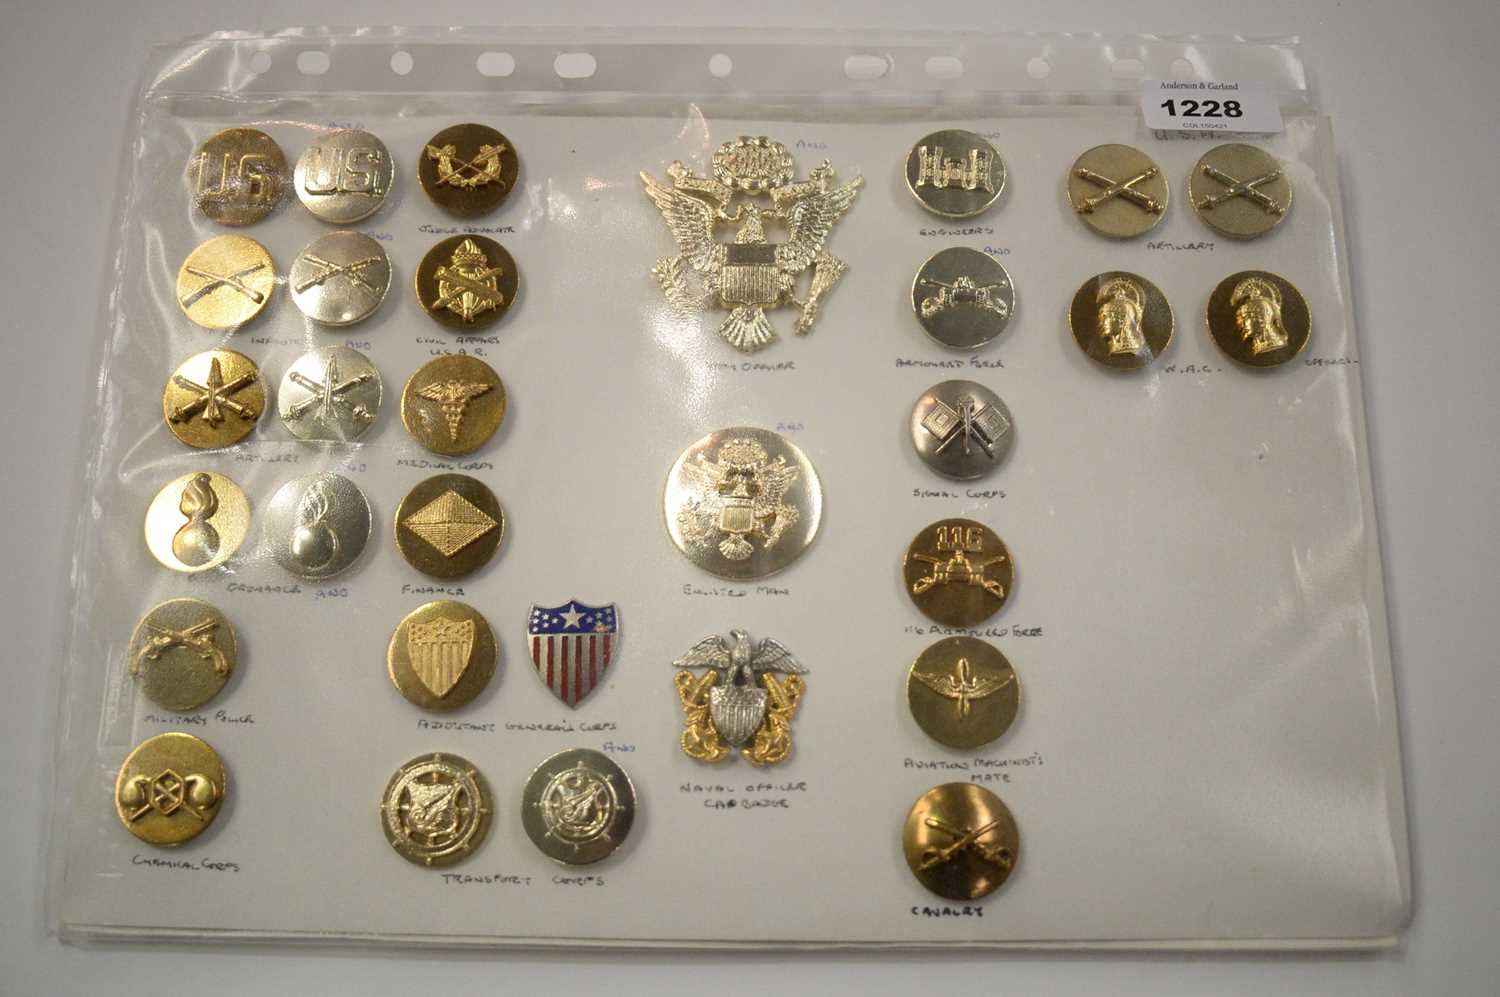 Lot 1228 - A collection of 31 American metal Insignia badges.